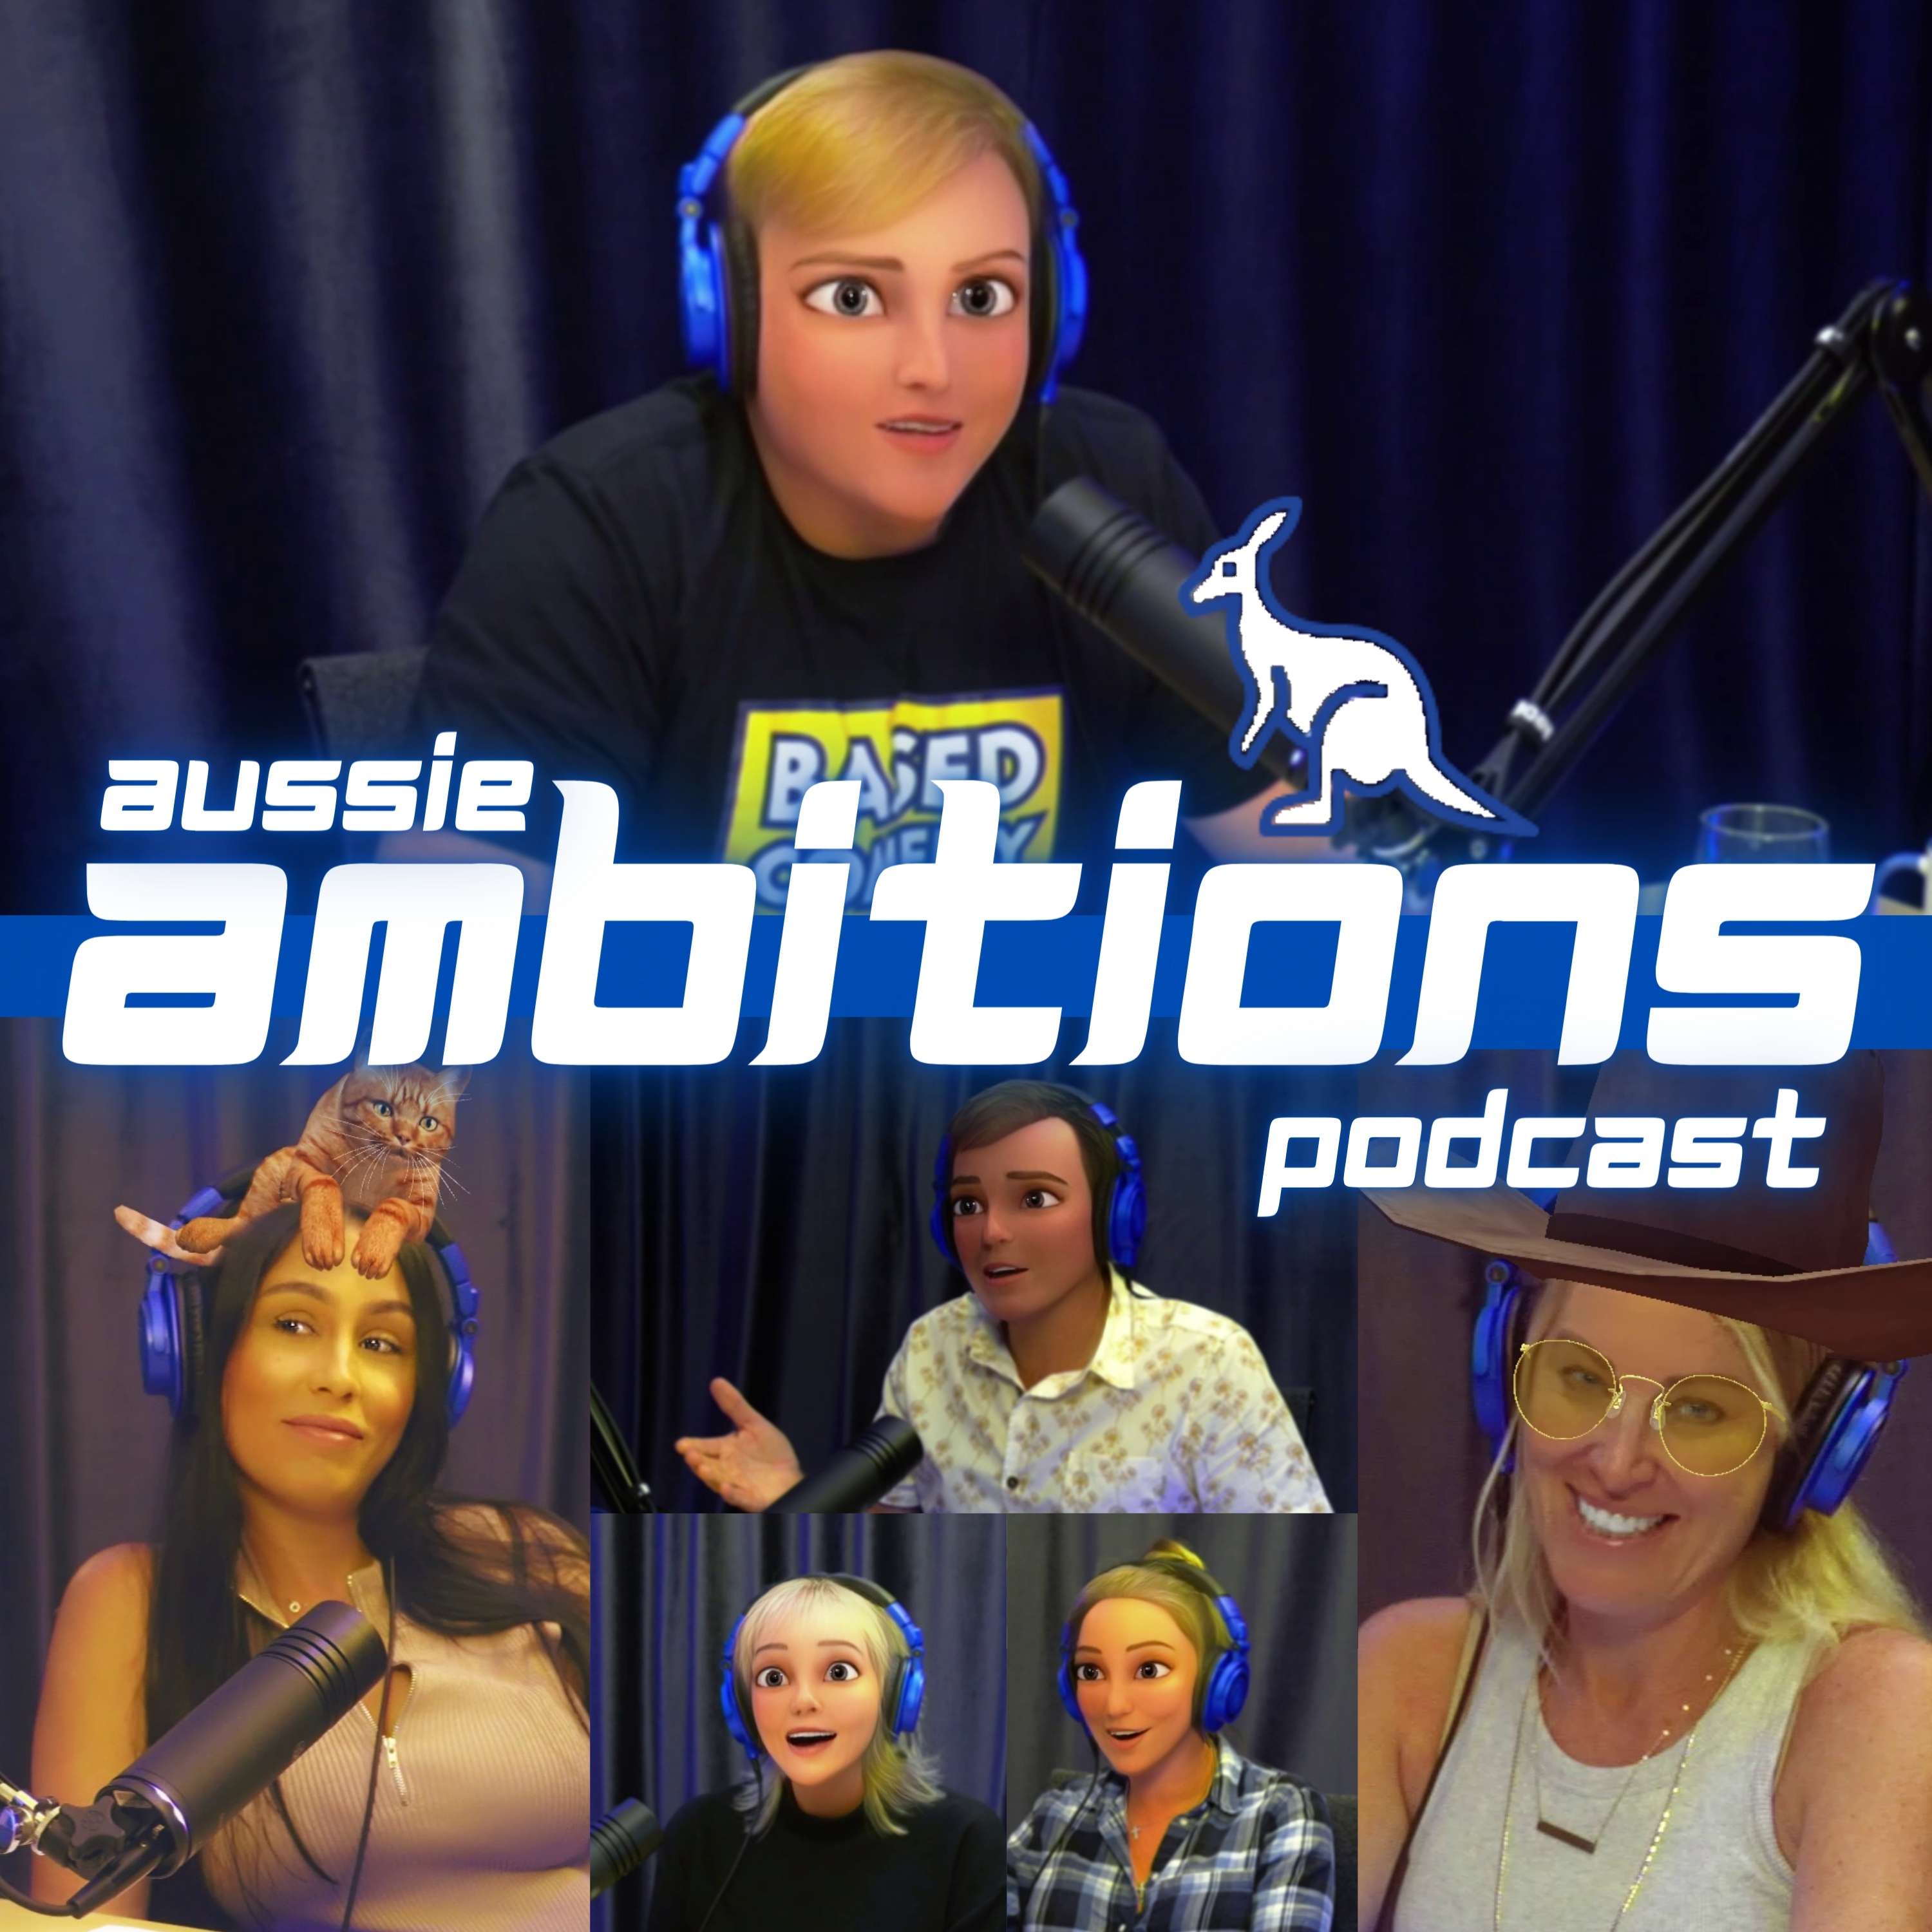 Artwork for podcast Aussie Ambitions Podcast